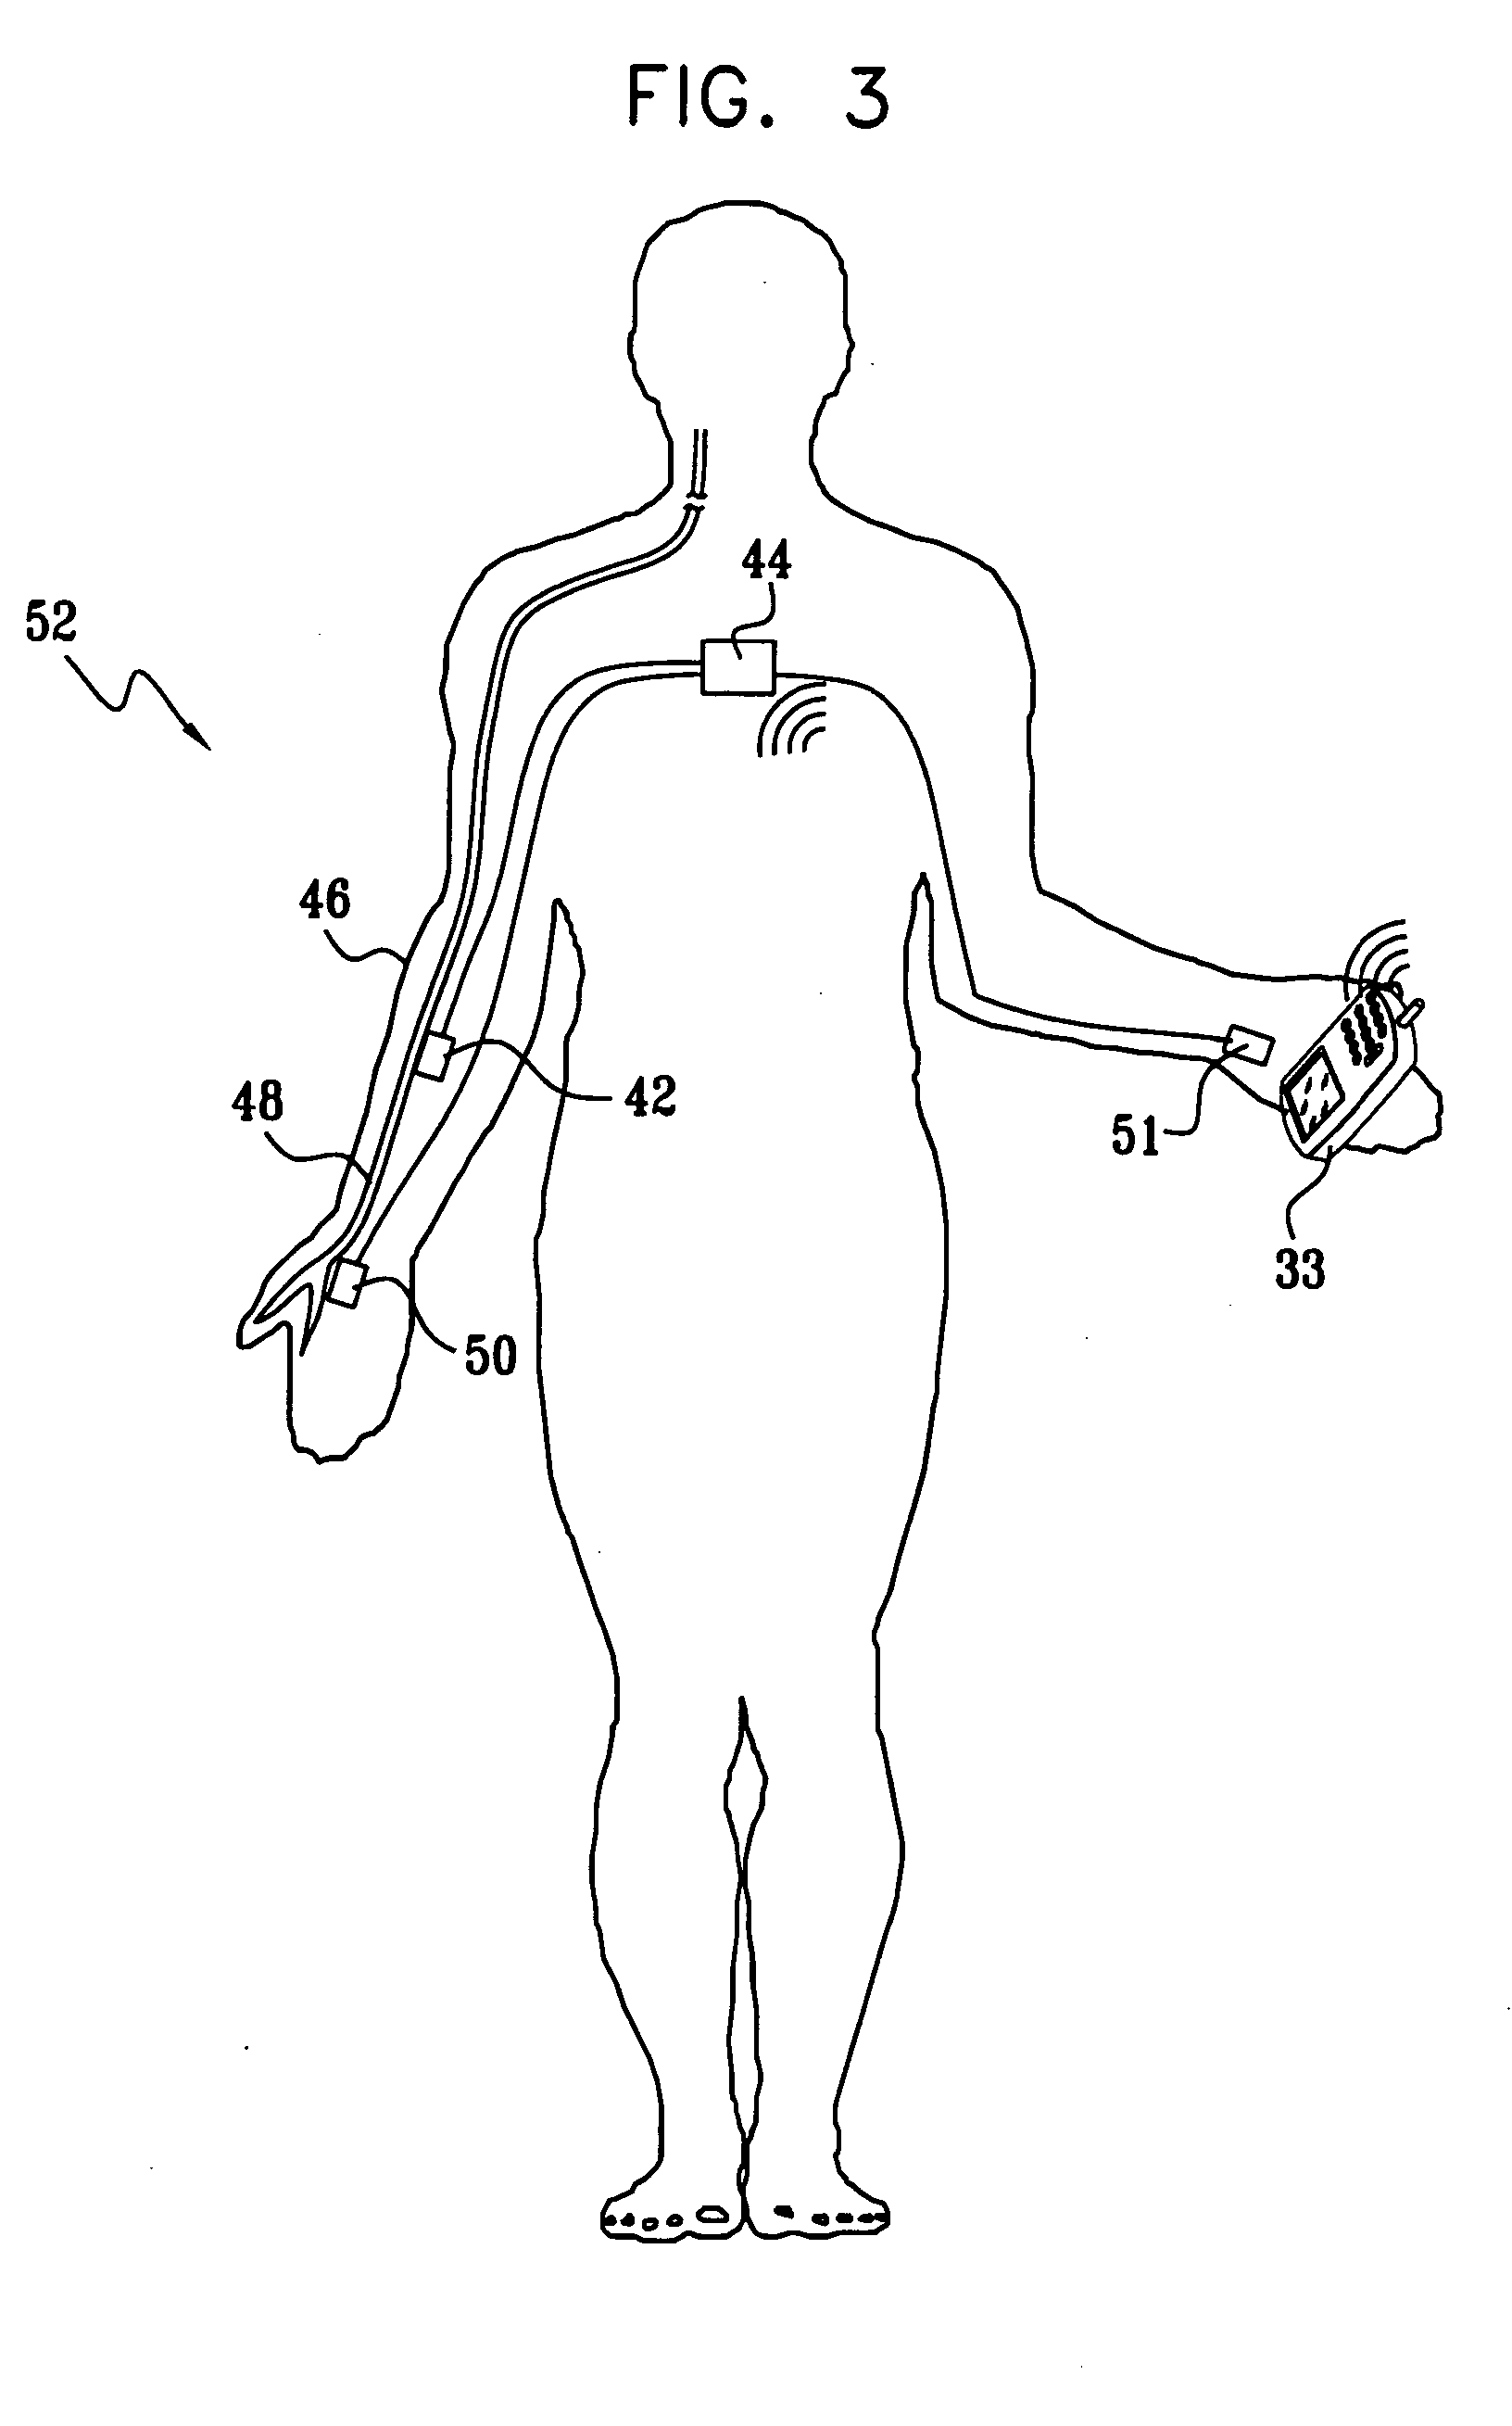 Actuation and control of limbs through motor nerve stimulation